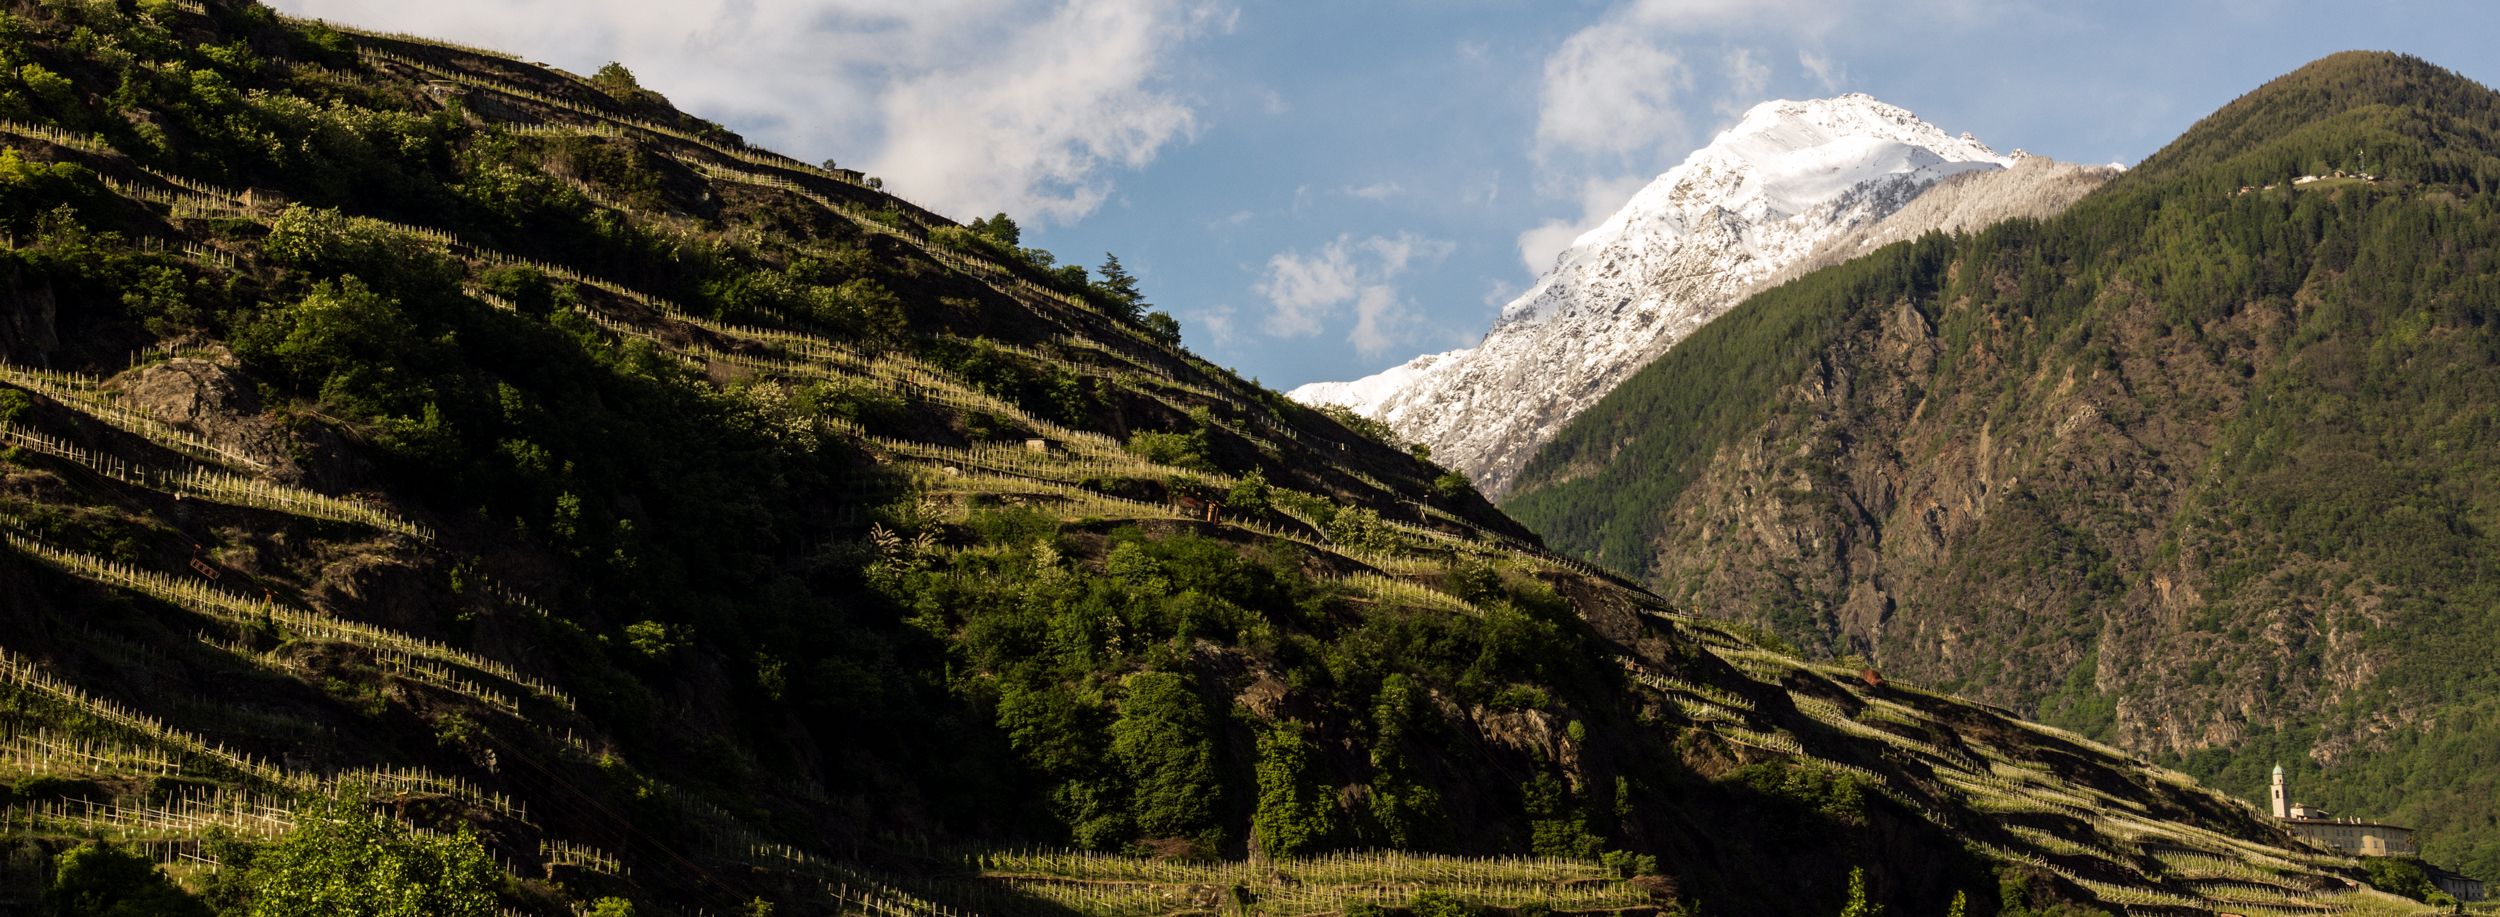 Nebbiolo from the Alps